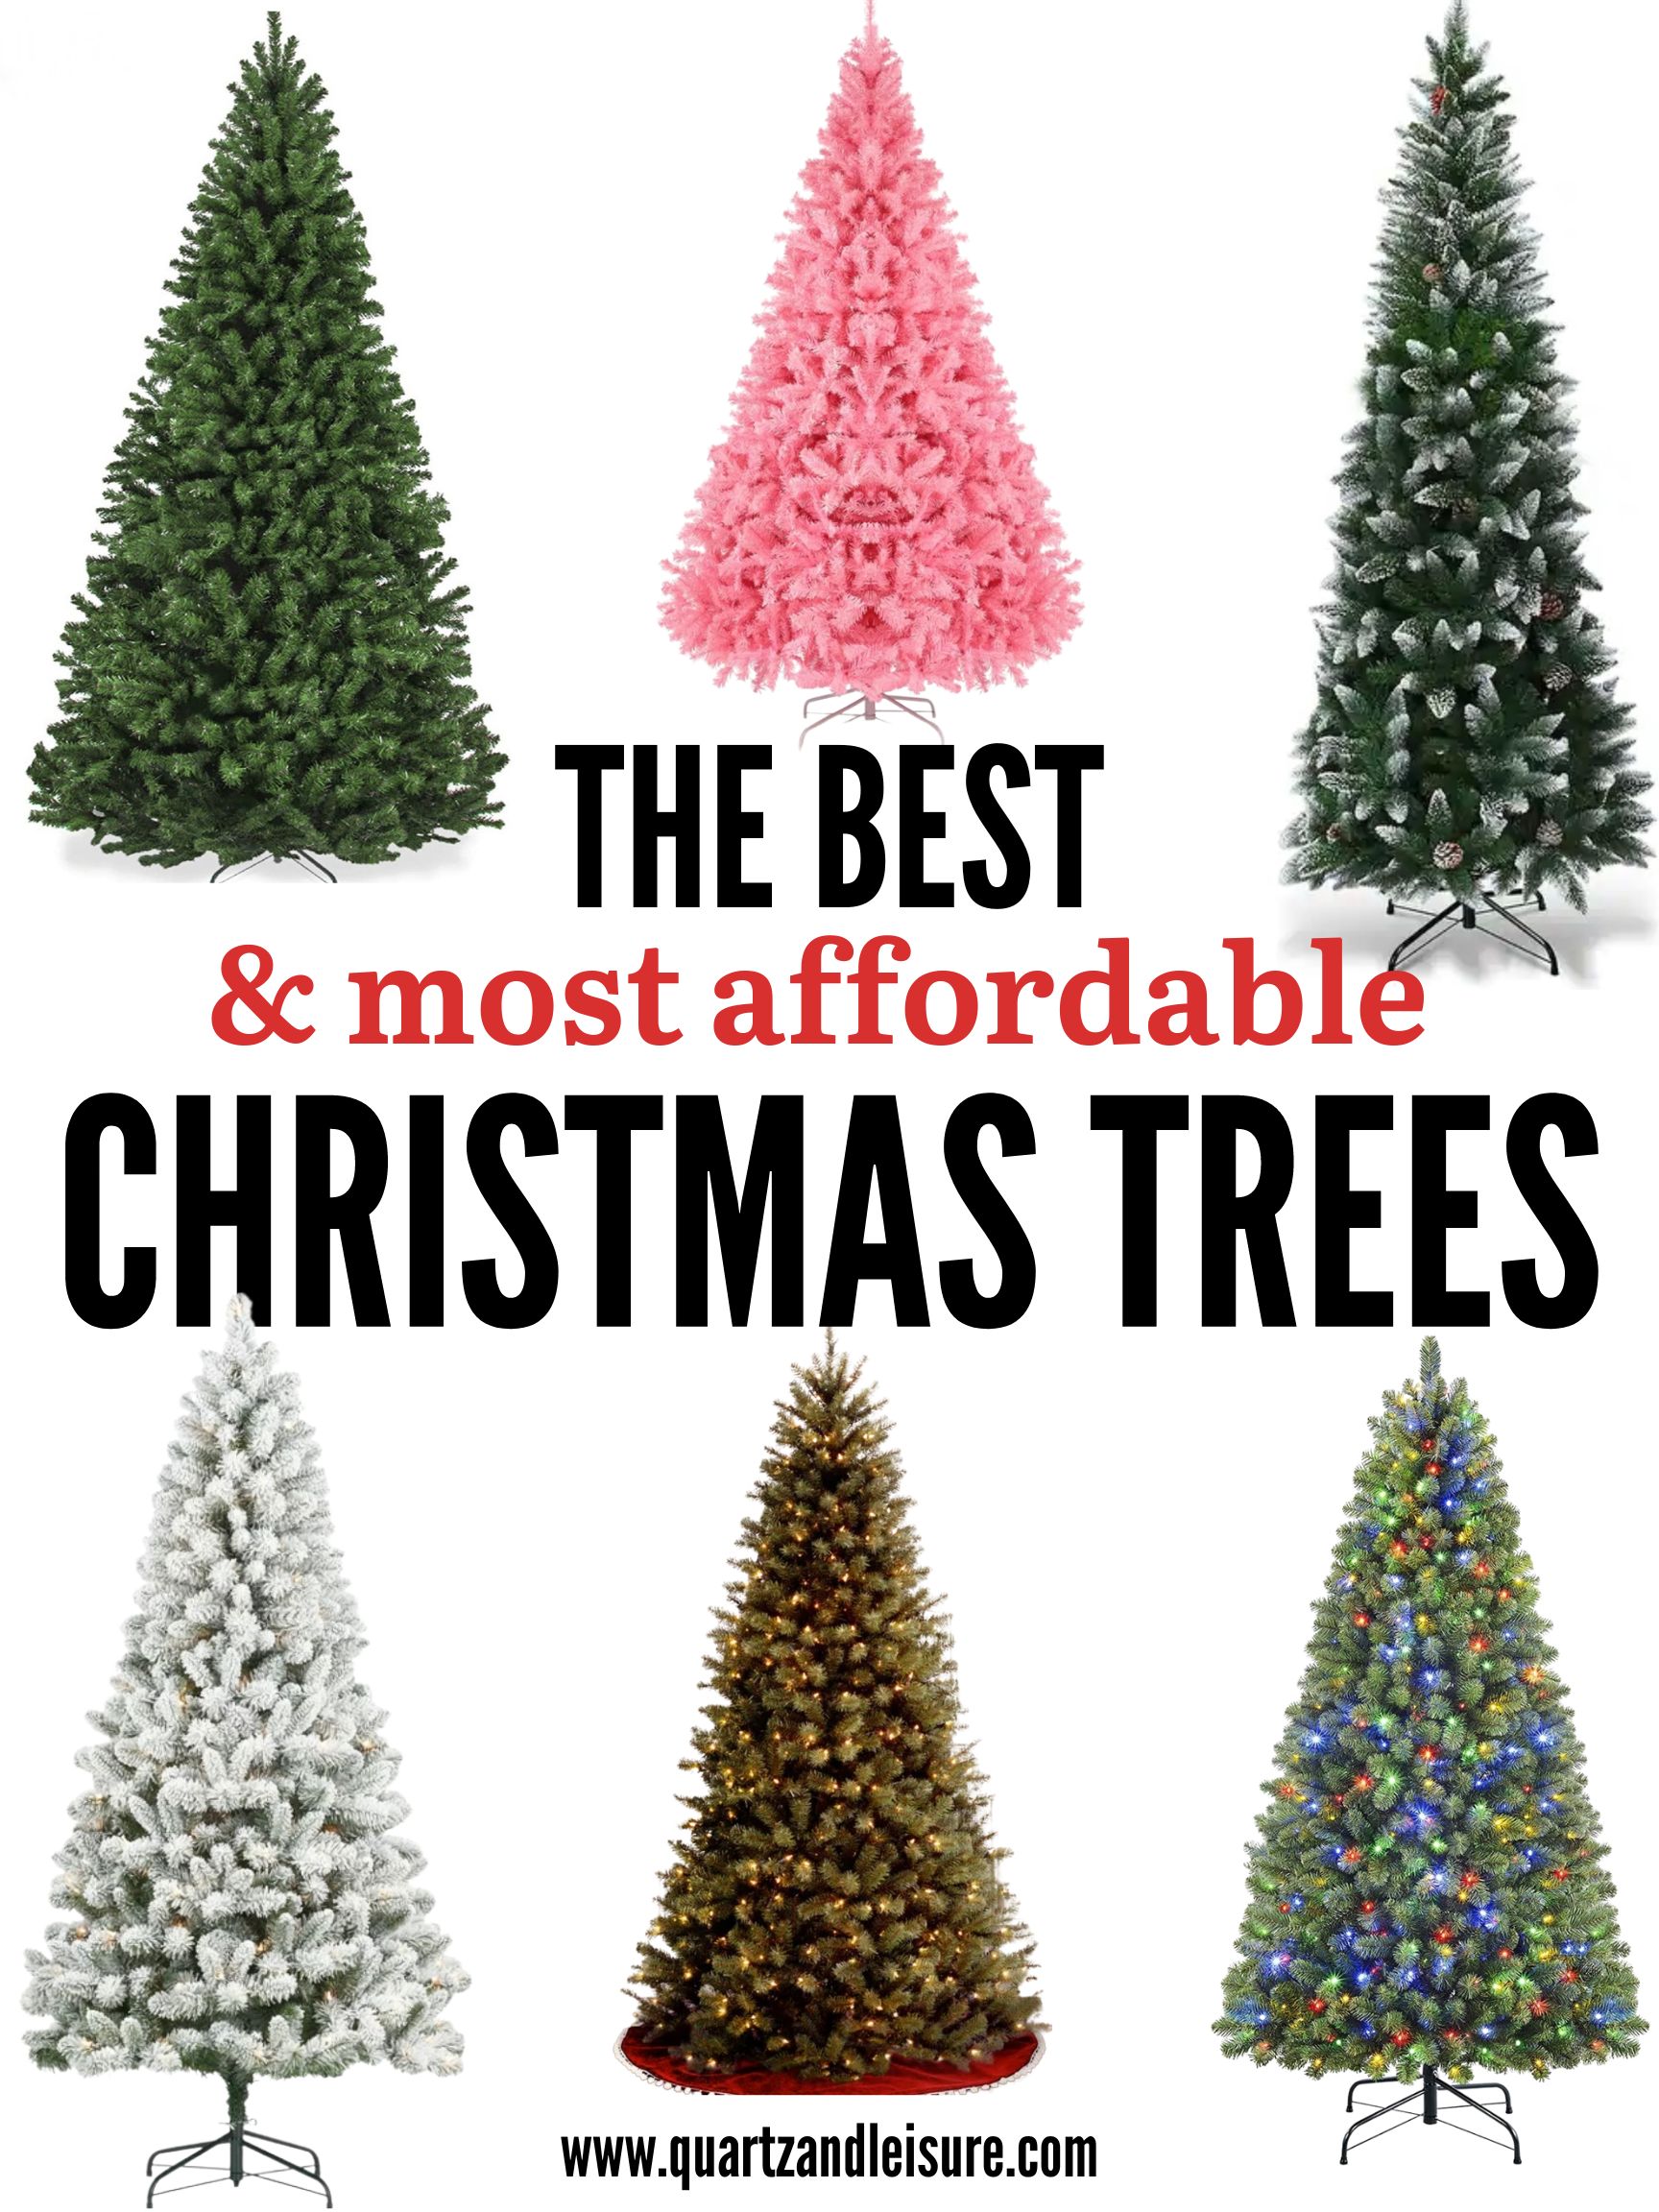 Cheap Artificial Christmas Trees Online